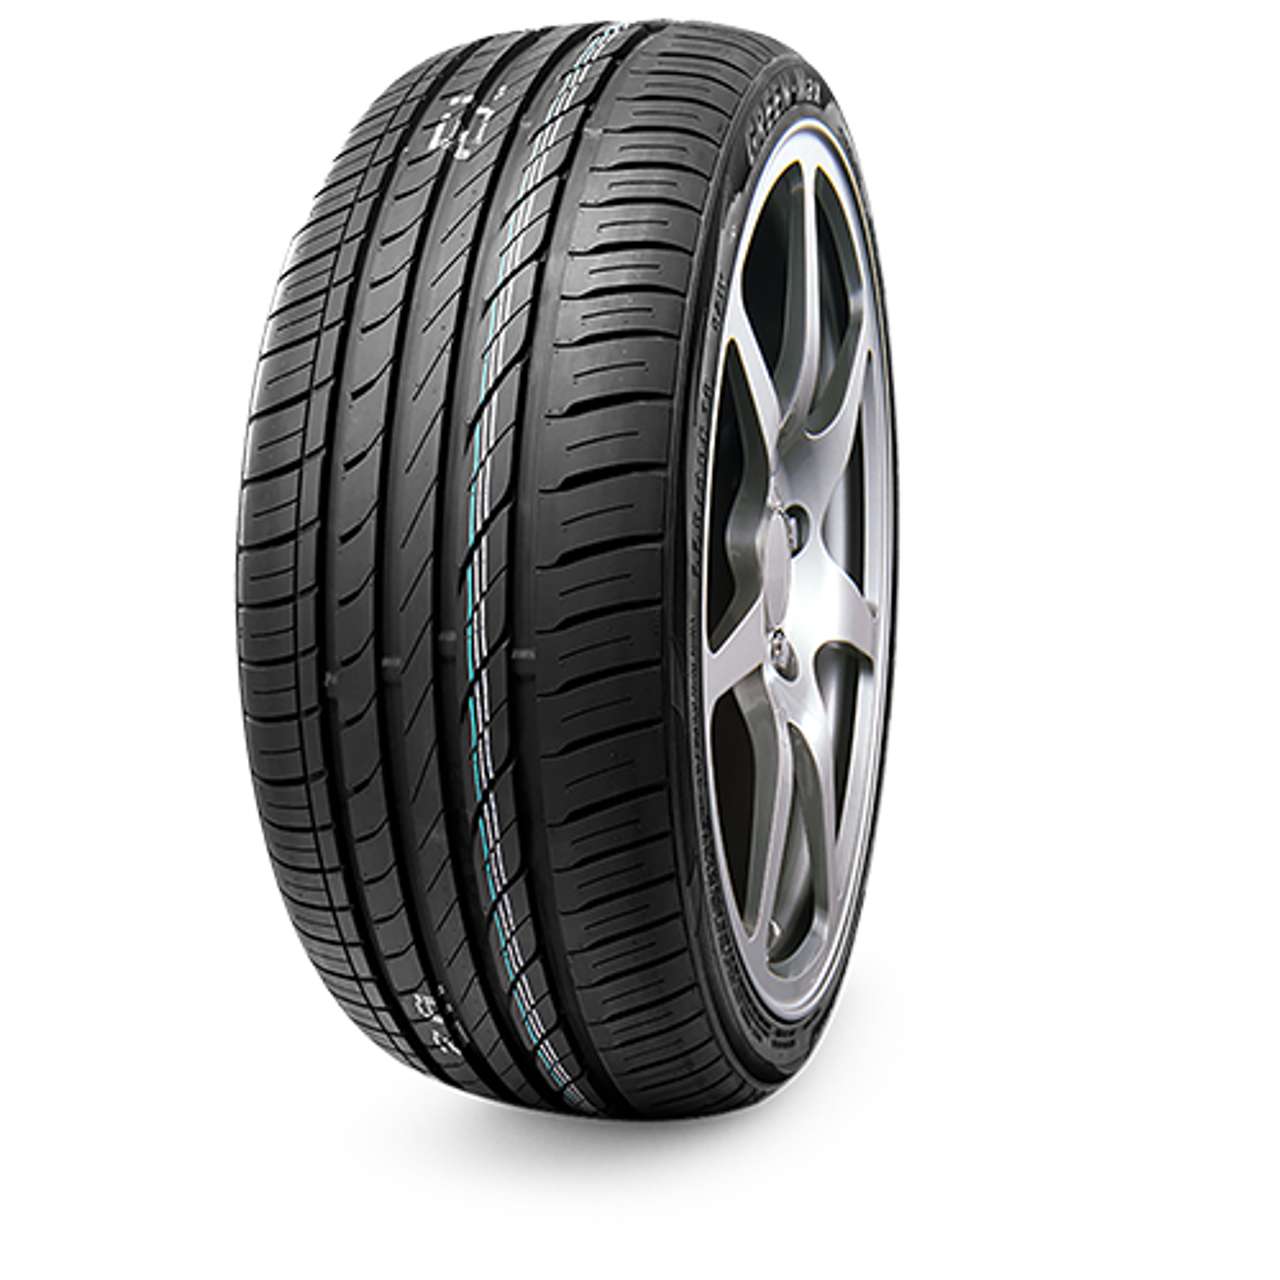 LINGLONG GREEN-MAX 235/50R17 96Y MFS BSW